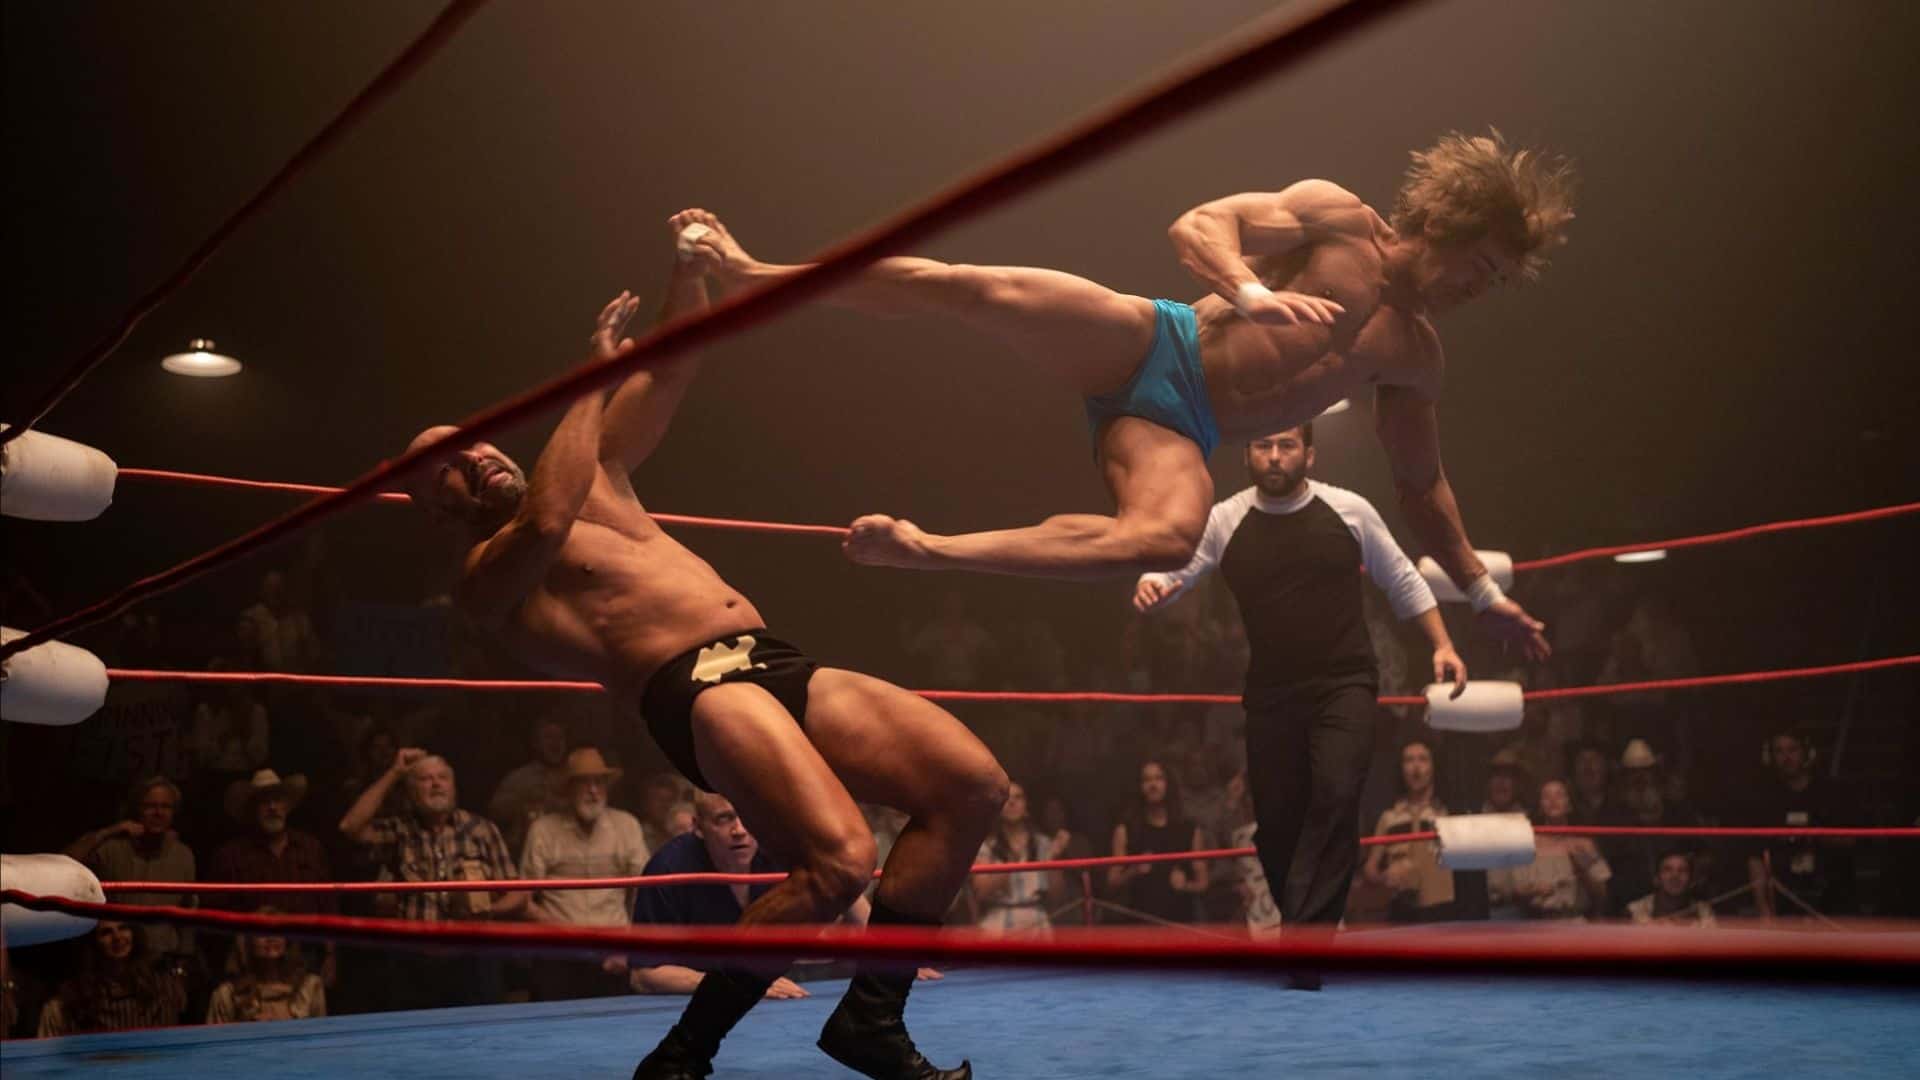 A wrestler does a flying kick into another wrestler in this image from A24.